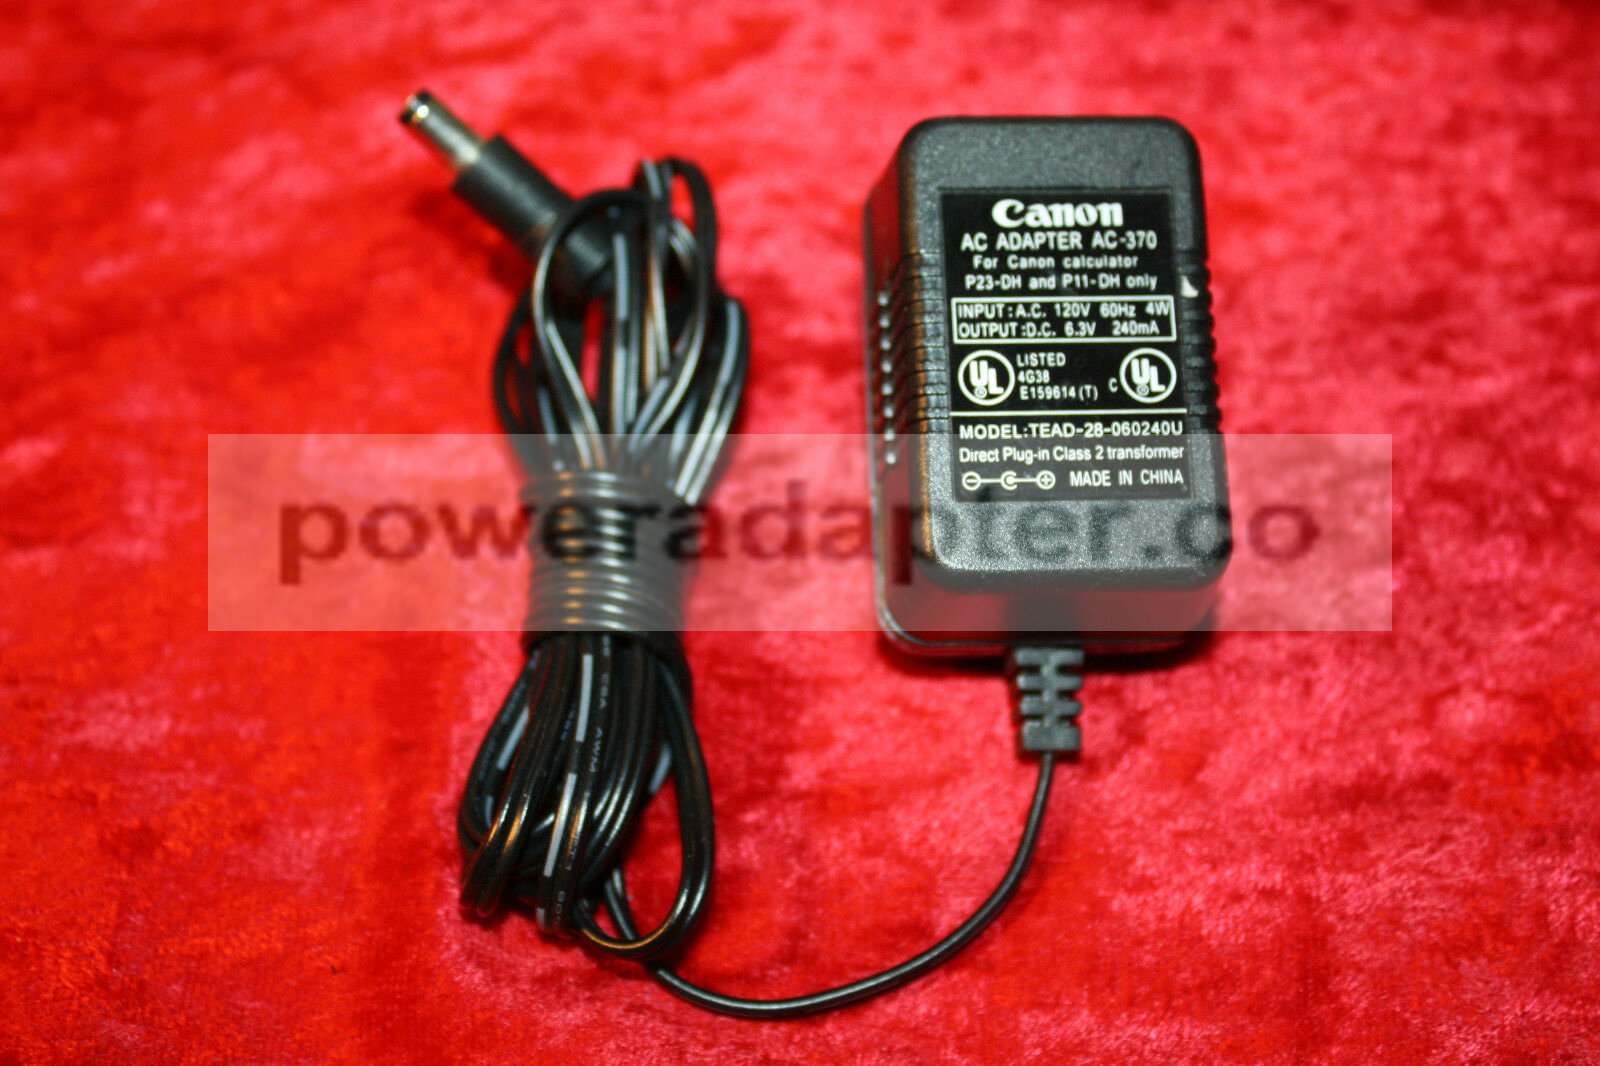 Canon AC-370 AC Adapter TEAD-28-060240U Condition: new Brand: Canon Type: AC Adapter Model: TEAD-28-060240U MPN: A